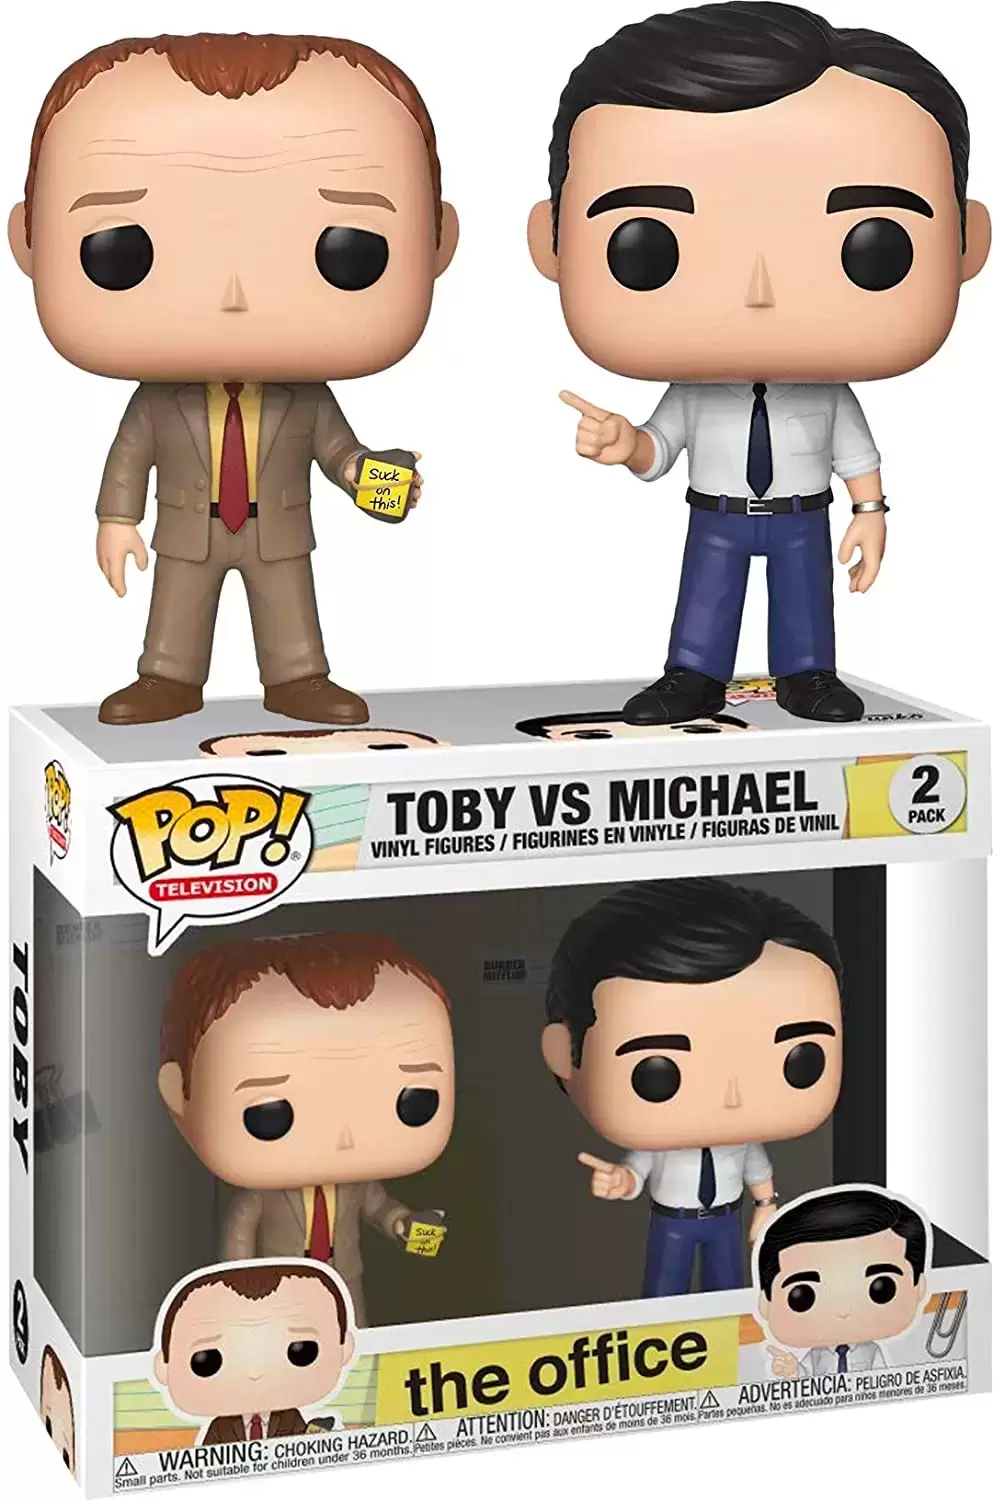 POP! Television - The Office - Toby vs. Michael 2 Pack